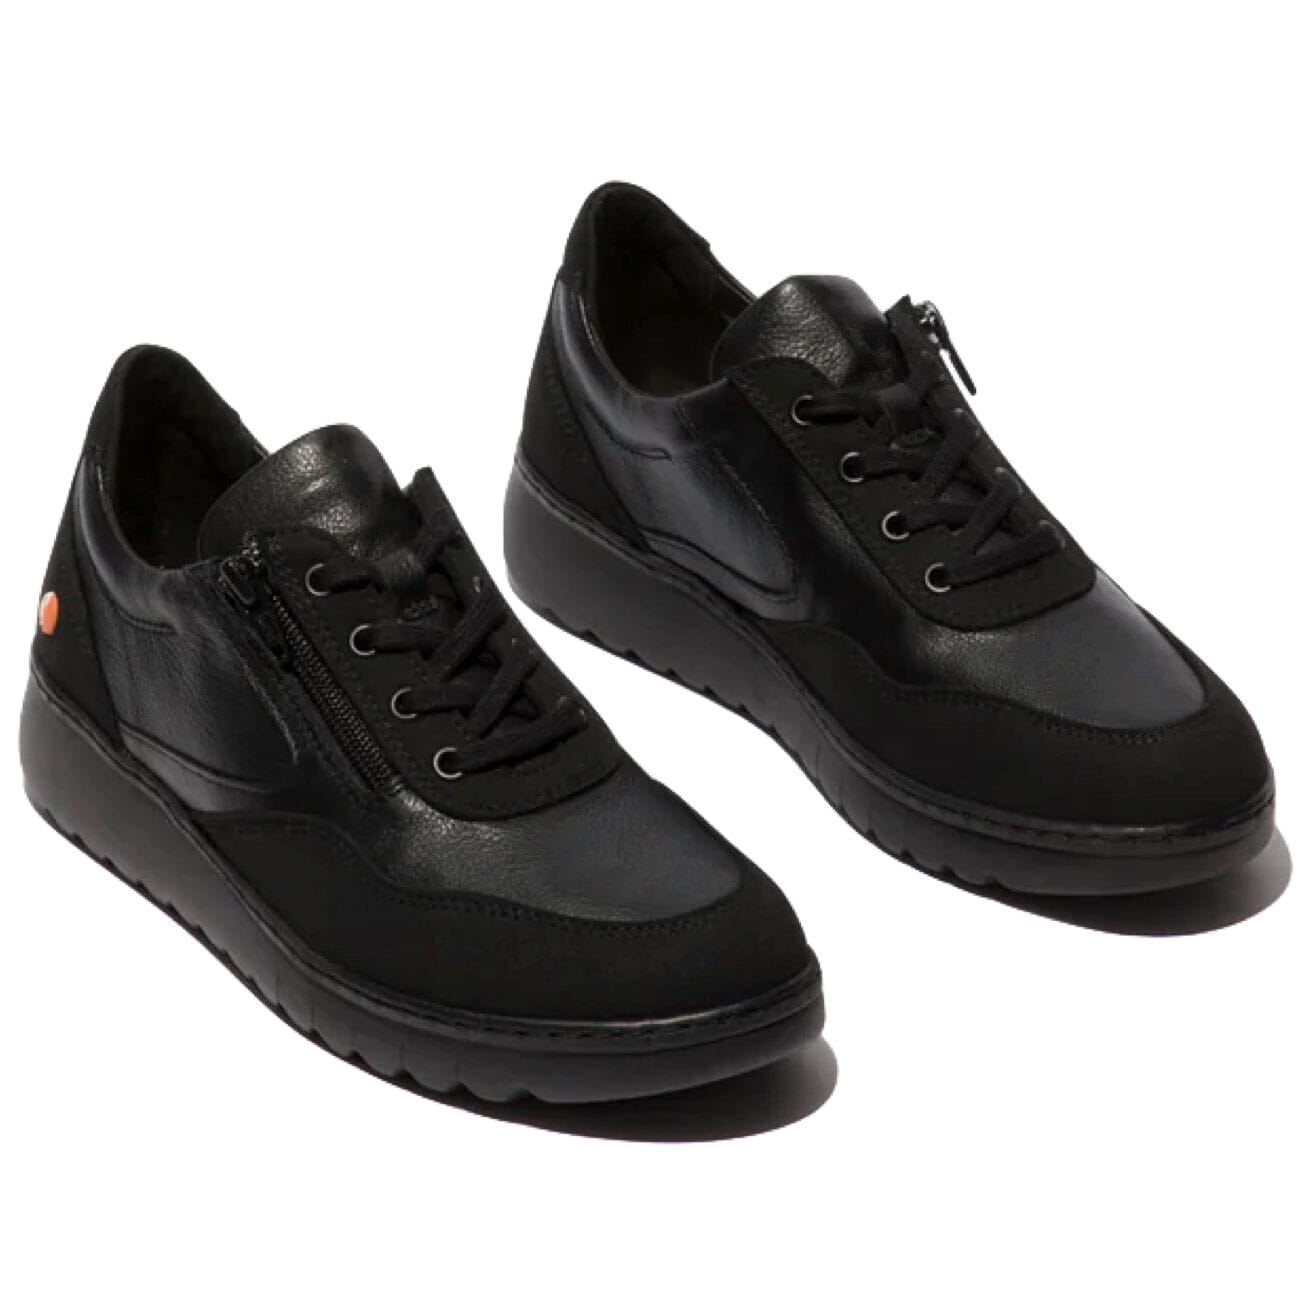 Softinos, Echo700, Laceup Shoe, Supple Leather & Suede, Black w/ Black Suede Shoes Softinos Black w/ Black Suede 36 